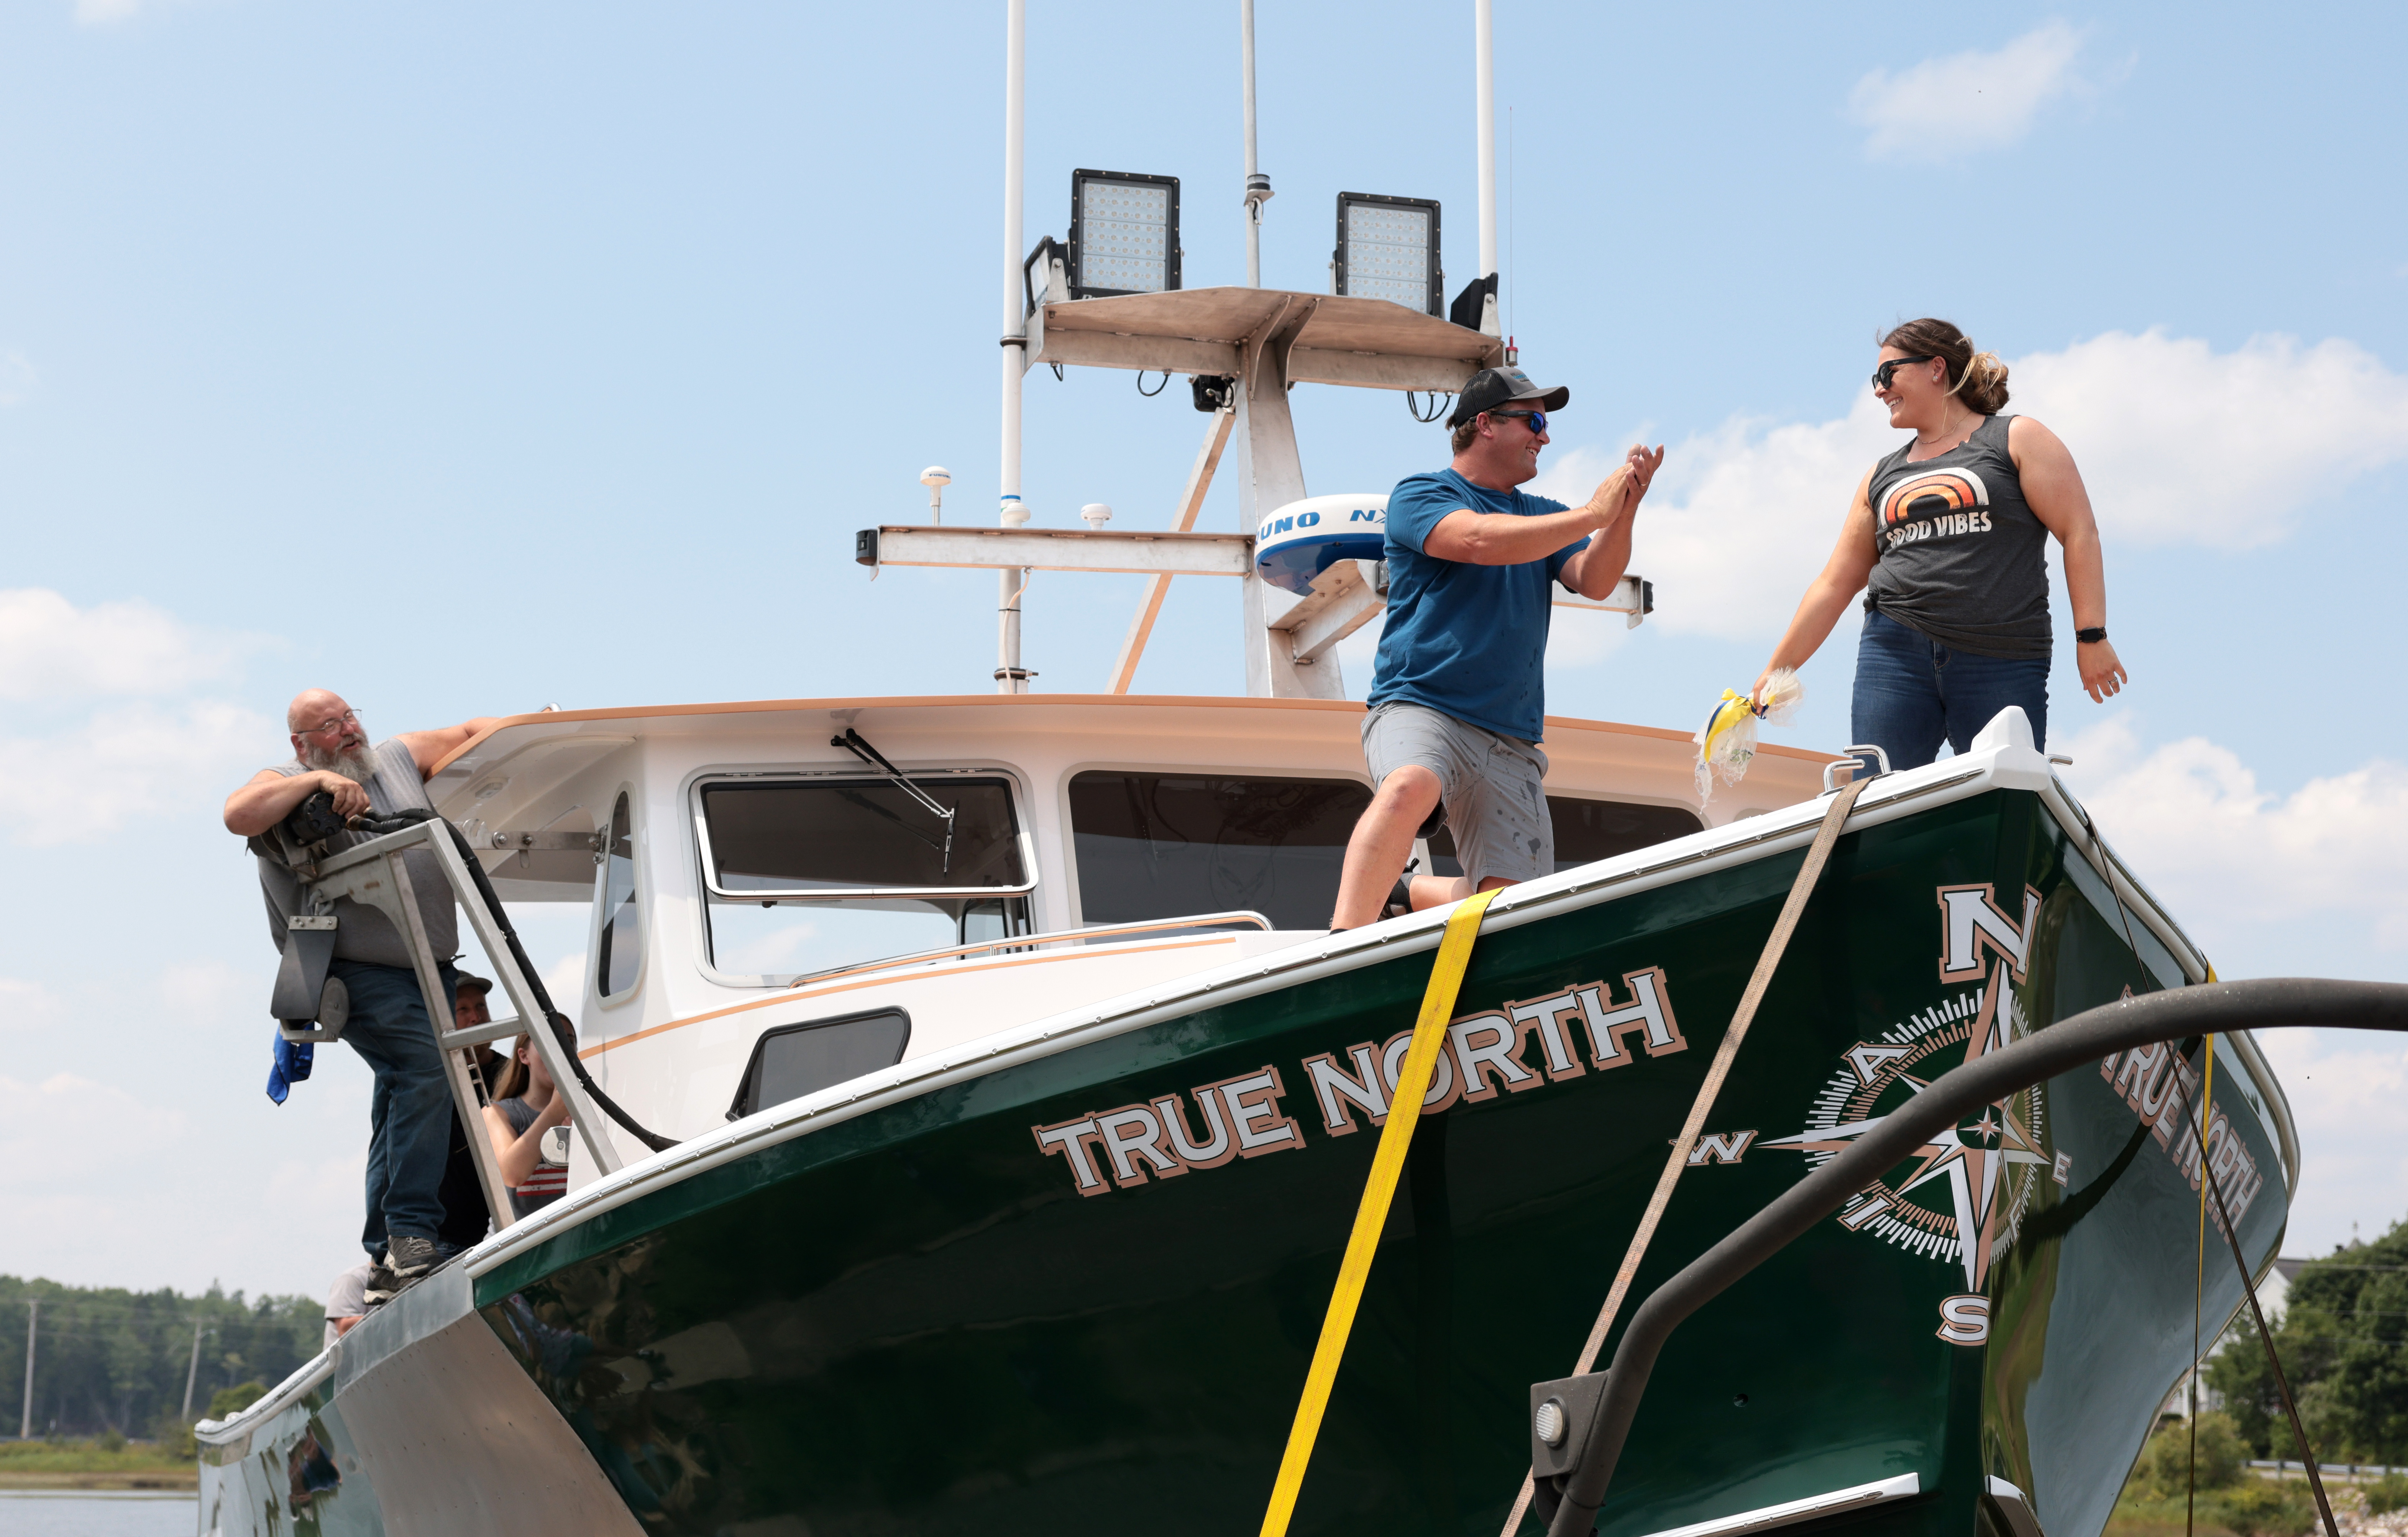 Johnny McCarthy applauded his wife, Ali, after she christened his new boat, True North, in Milbridge, Maine, on July 27. “For a fisherman, launching a new boat is like having a baby,” McCarthy says. “It’s something a guy like me is lucky to do even once. ... On launch day, I don’t want to worry about tomorrow.” 